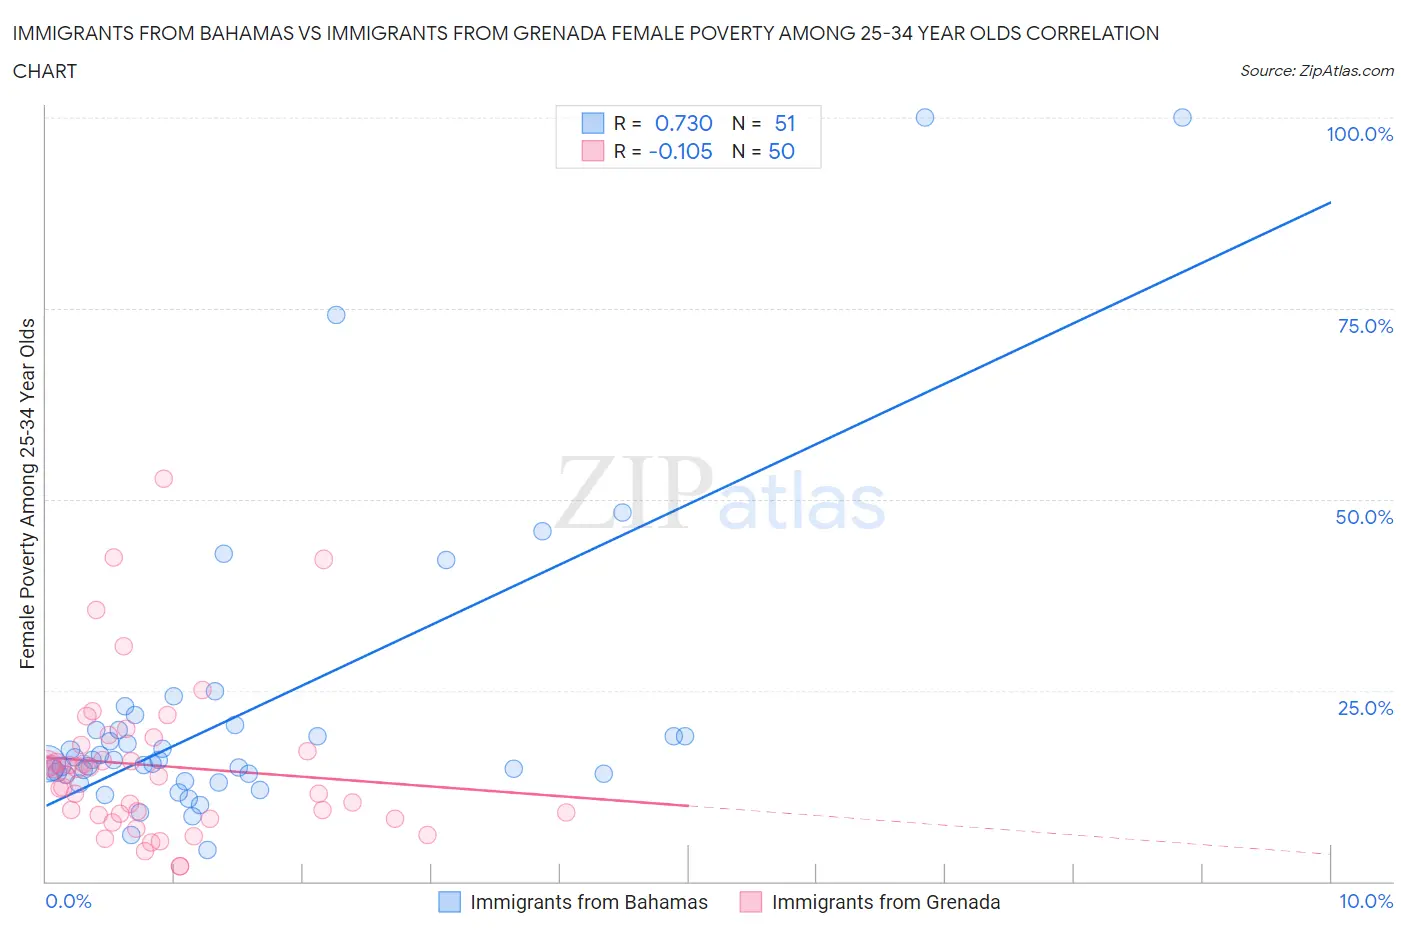 Immigrants from Bahamas vs Immigrants from Grenada Female Poverty Among 25-34 Year Olds